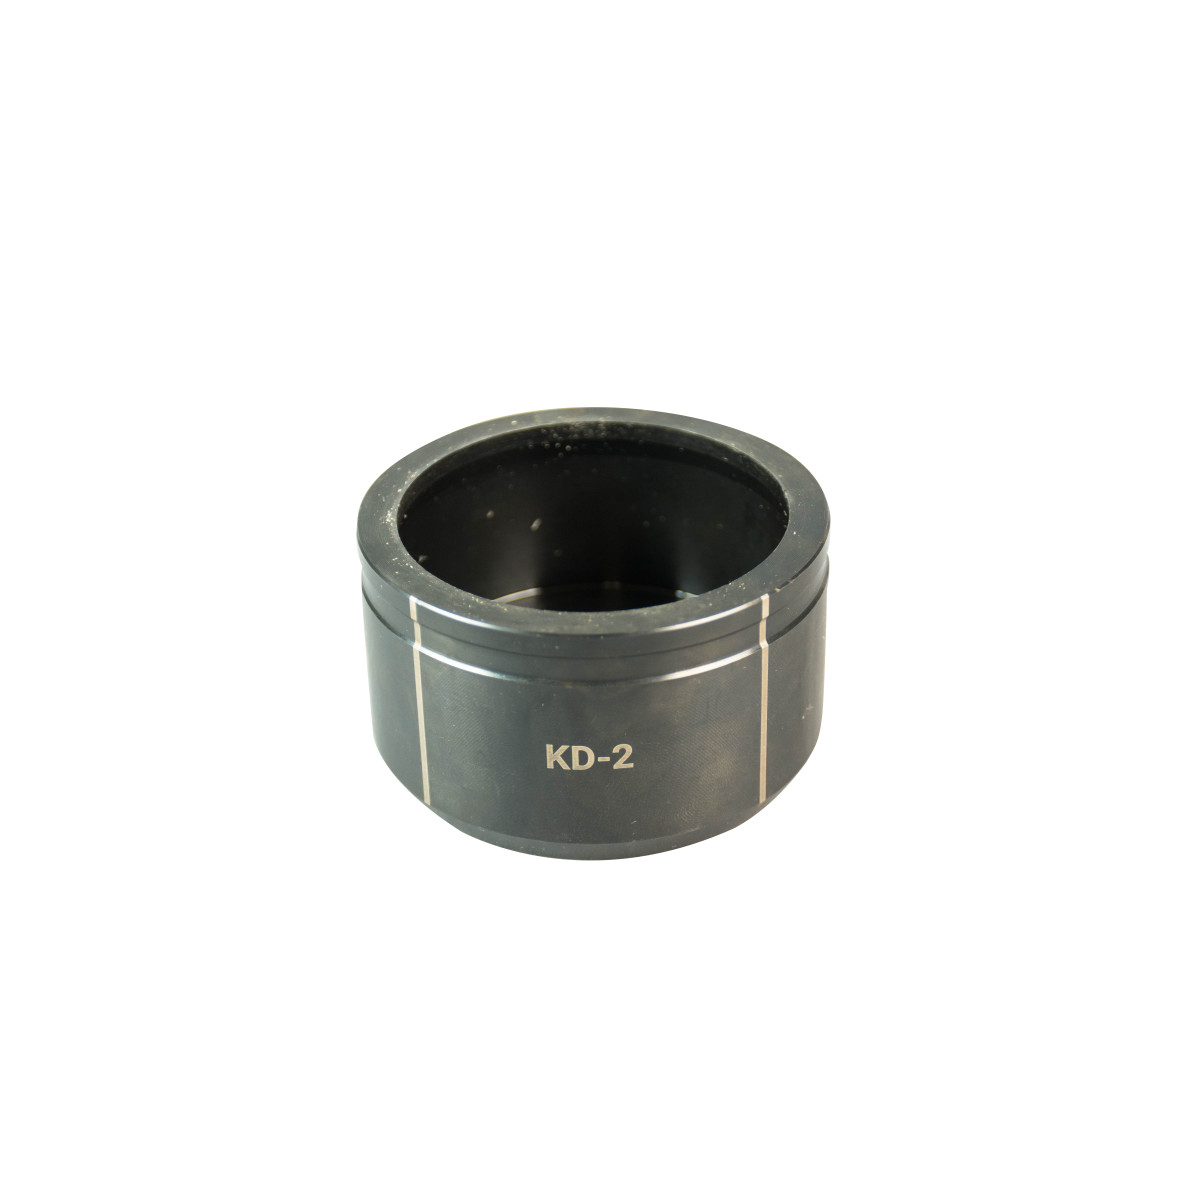 2" Conduit Size Knockout Die sold in  qty's of 4.  Optimized for widest range of materials and drivers.  Alignment markings for improved accuracy.  Laser markings for quick part identification.  Made in USA